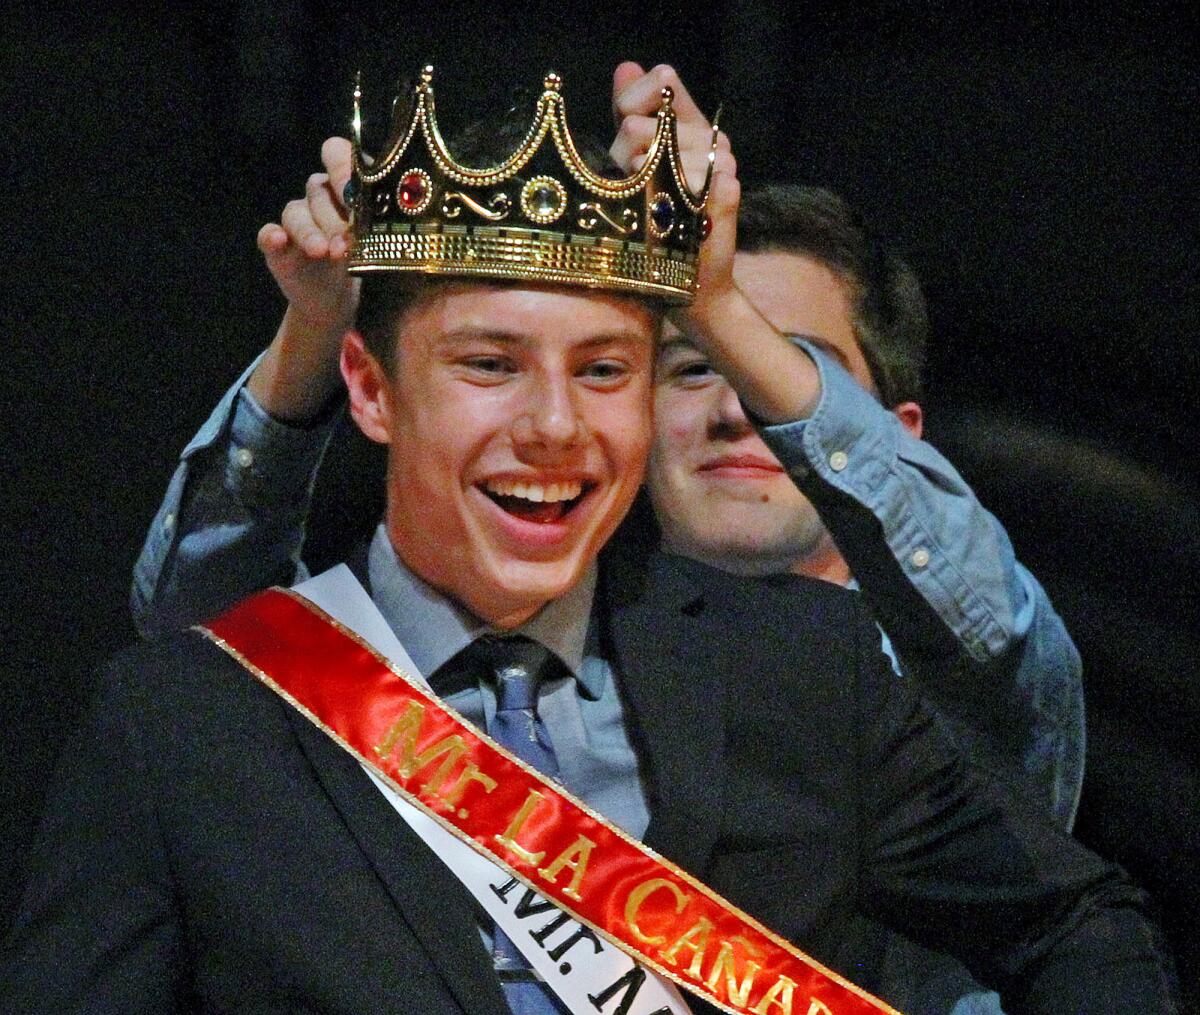 Zac Main is crowned by host Josh Cabello as Mr. La Canada 2015, a male student beauty pageant, at La Canada High School on Friday, March 27, 2015. The pageant is a fundraiser for the Joyful Heart Foundation, an organization founded by Law & Order" SVU's Mariska Hargitay with a mission to heal, educate and empower the survivors of sexual assault, domestic violence, and child abuse.